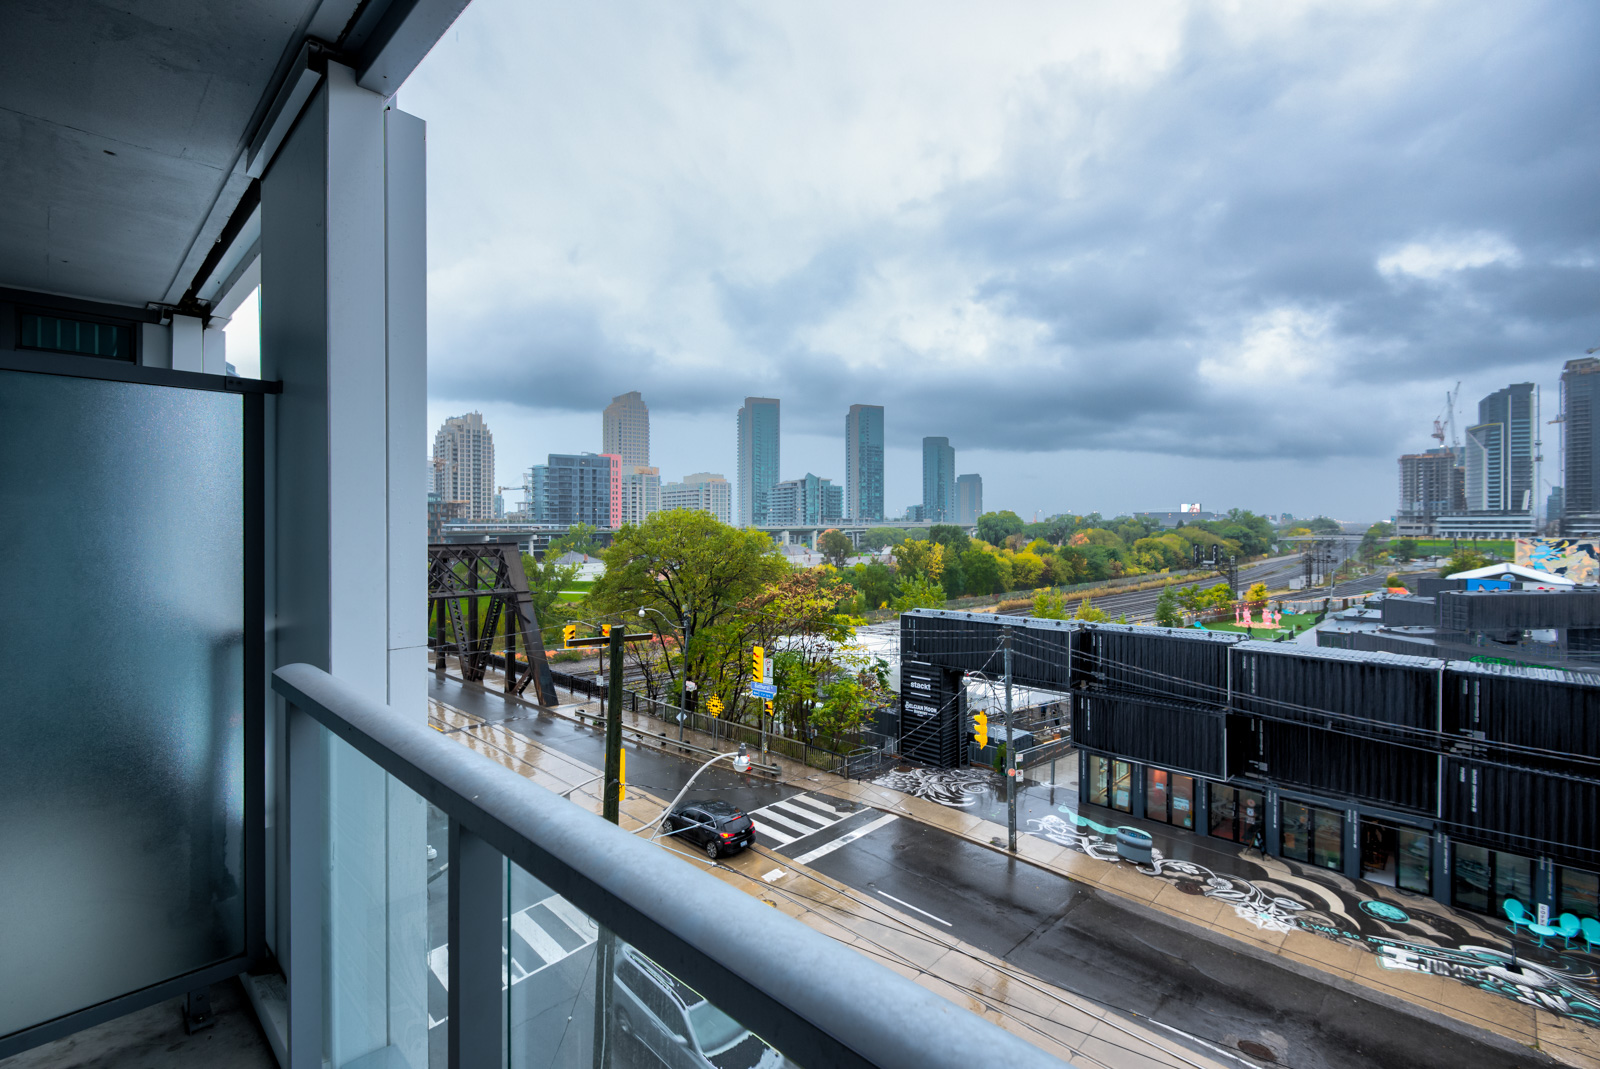 Balcony view from Minto Condos of distant buildings, cloudy skies and slippery, rain-soaked Bathurst St.